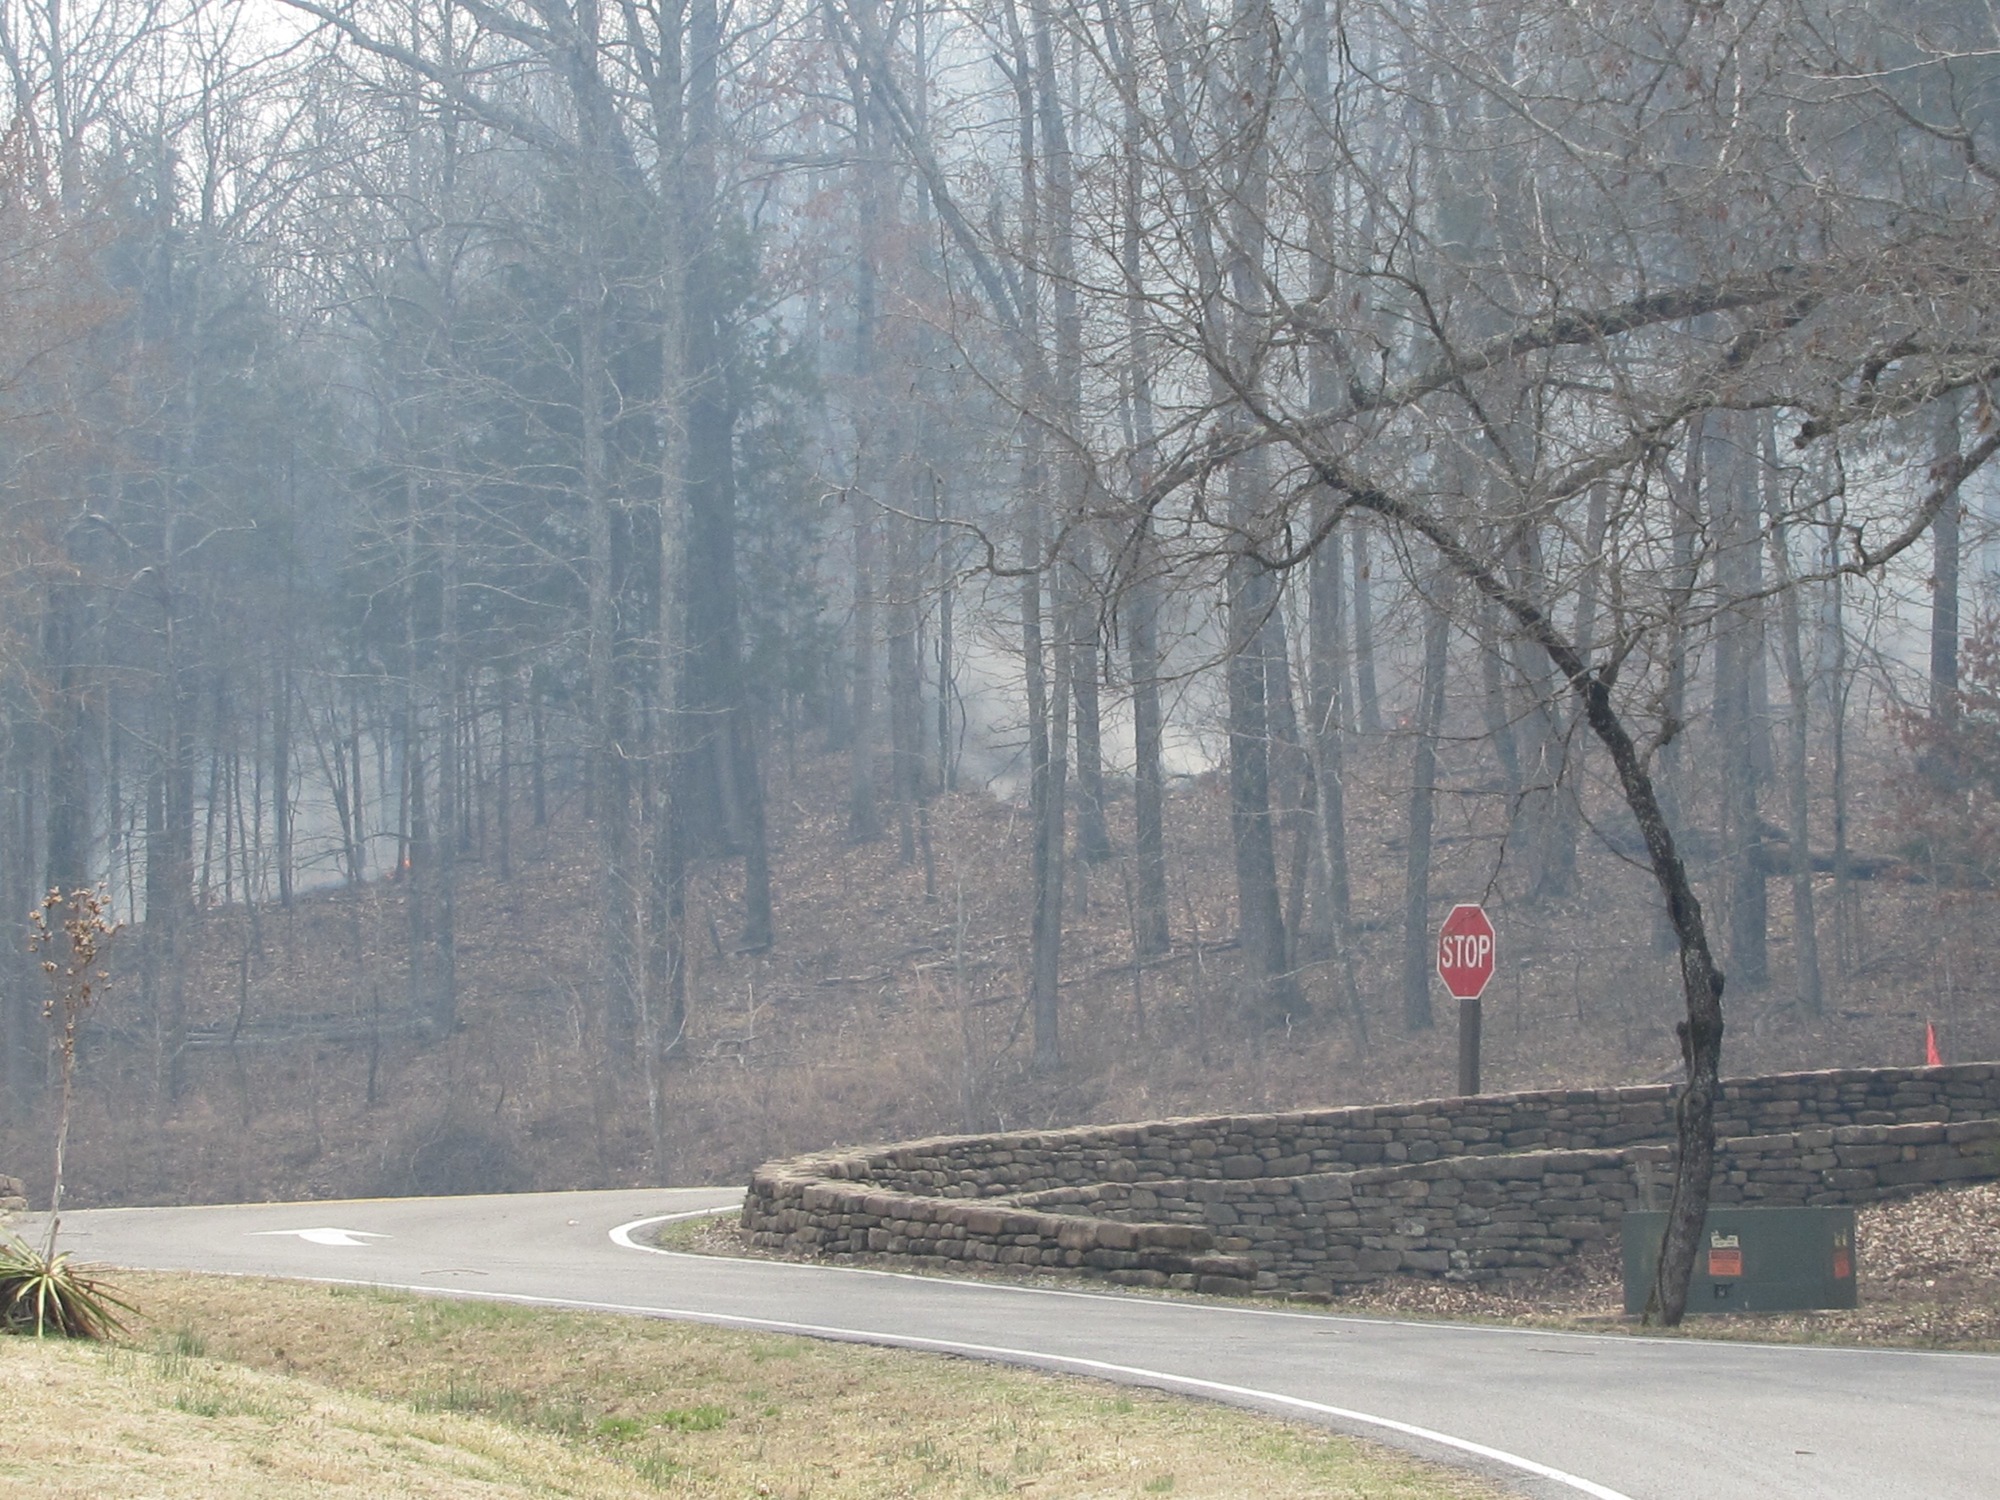 color photo of woods with plumes of white smoke at center. Green and brown grass and drive way in foreground and stop sign at right